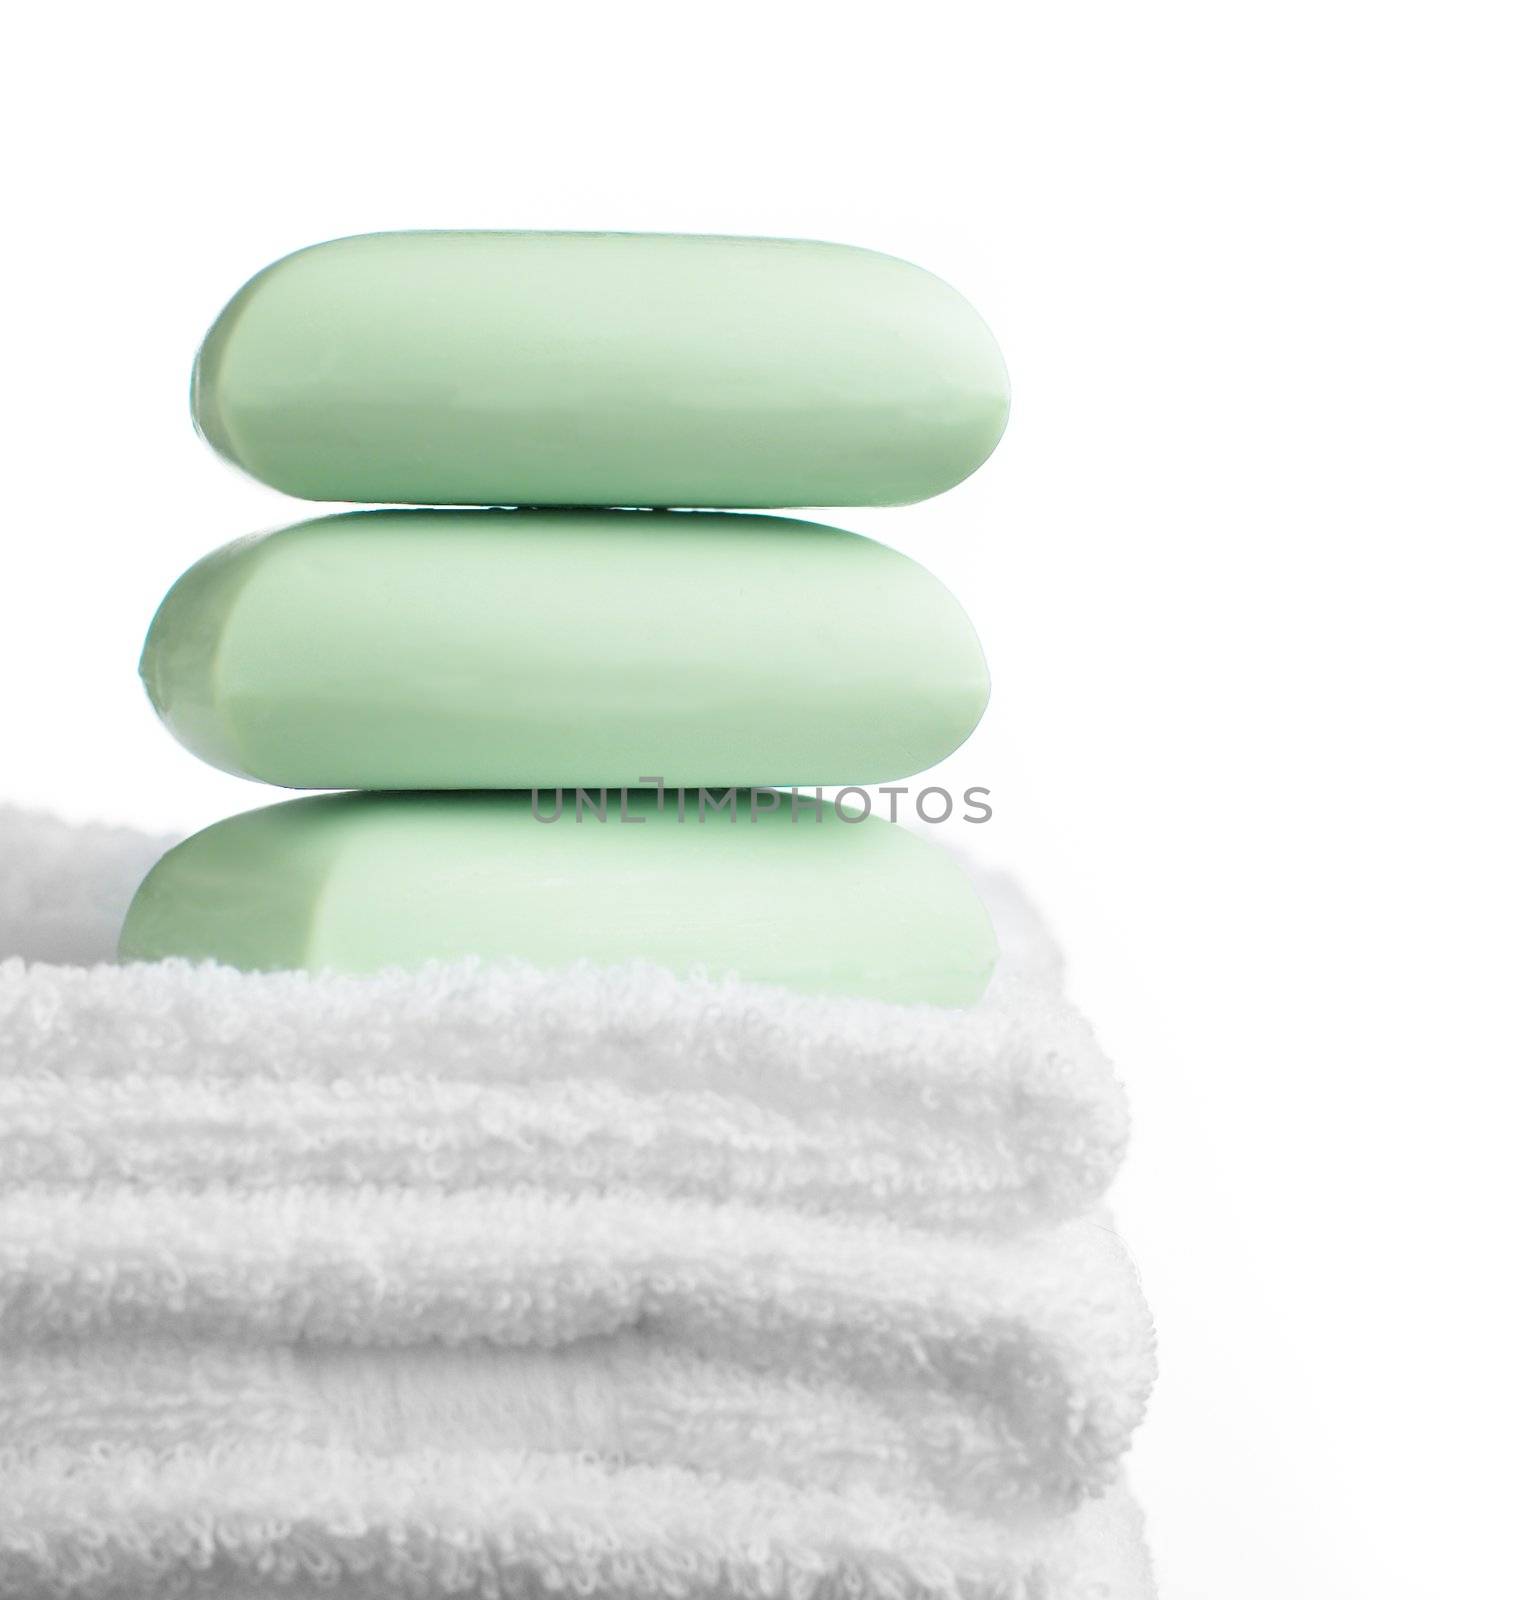 Stack of soap bars and towels against white.